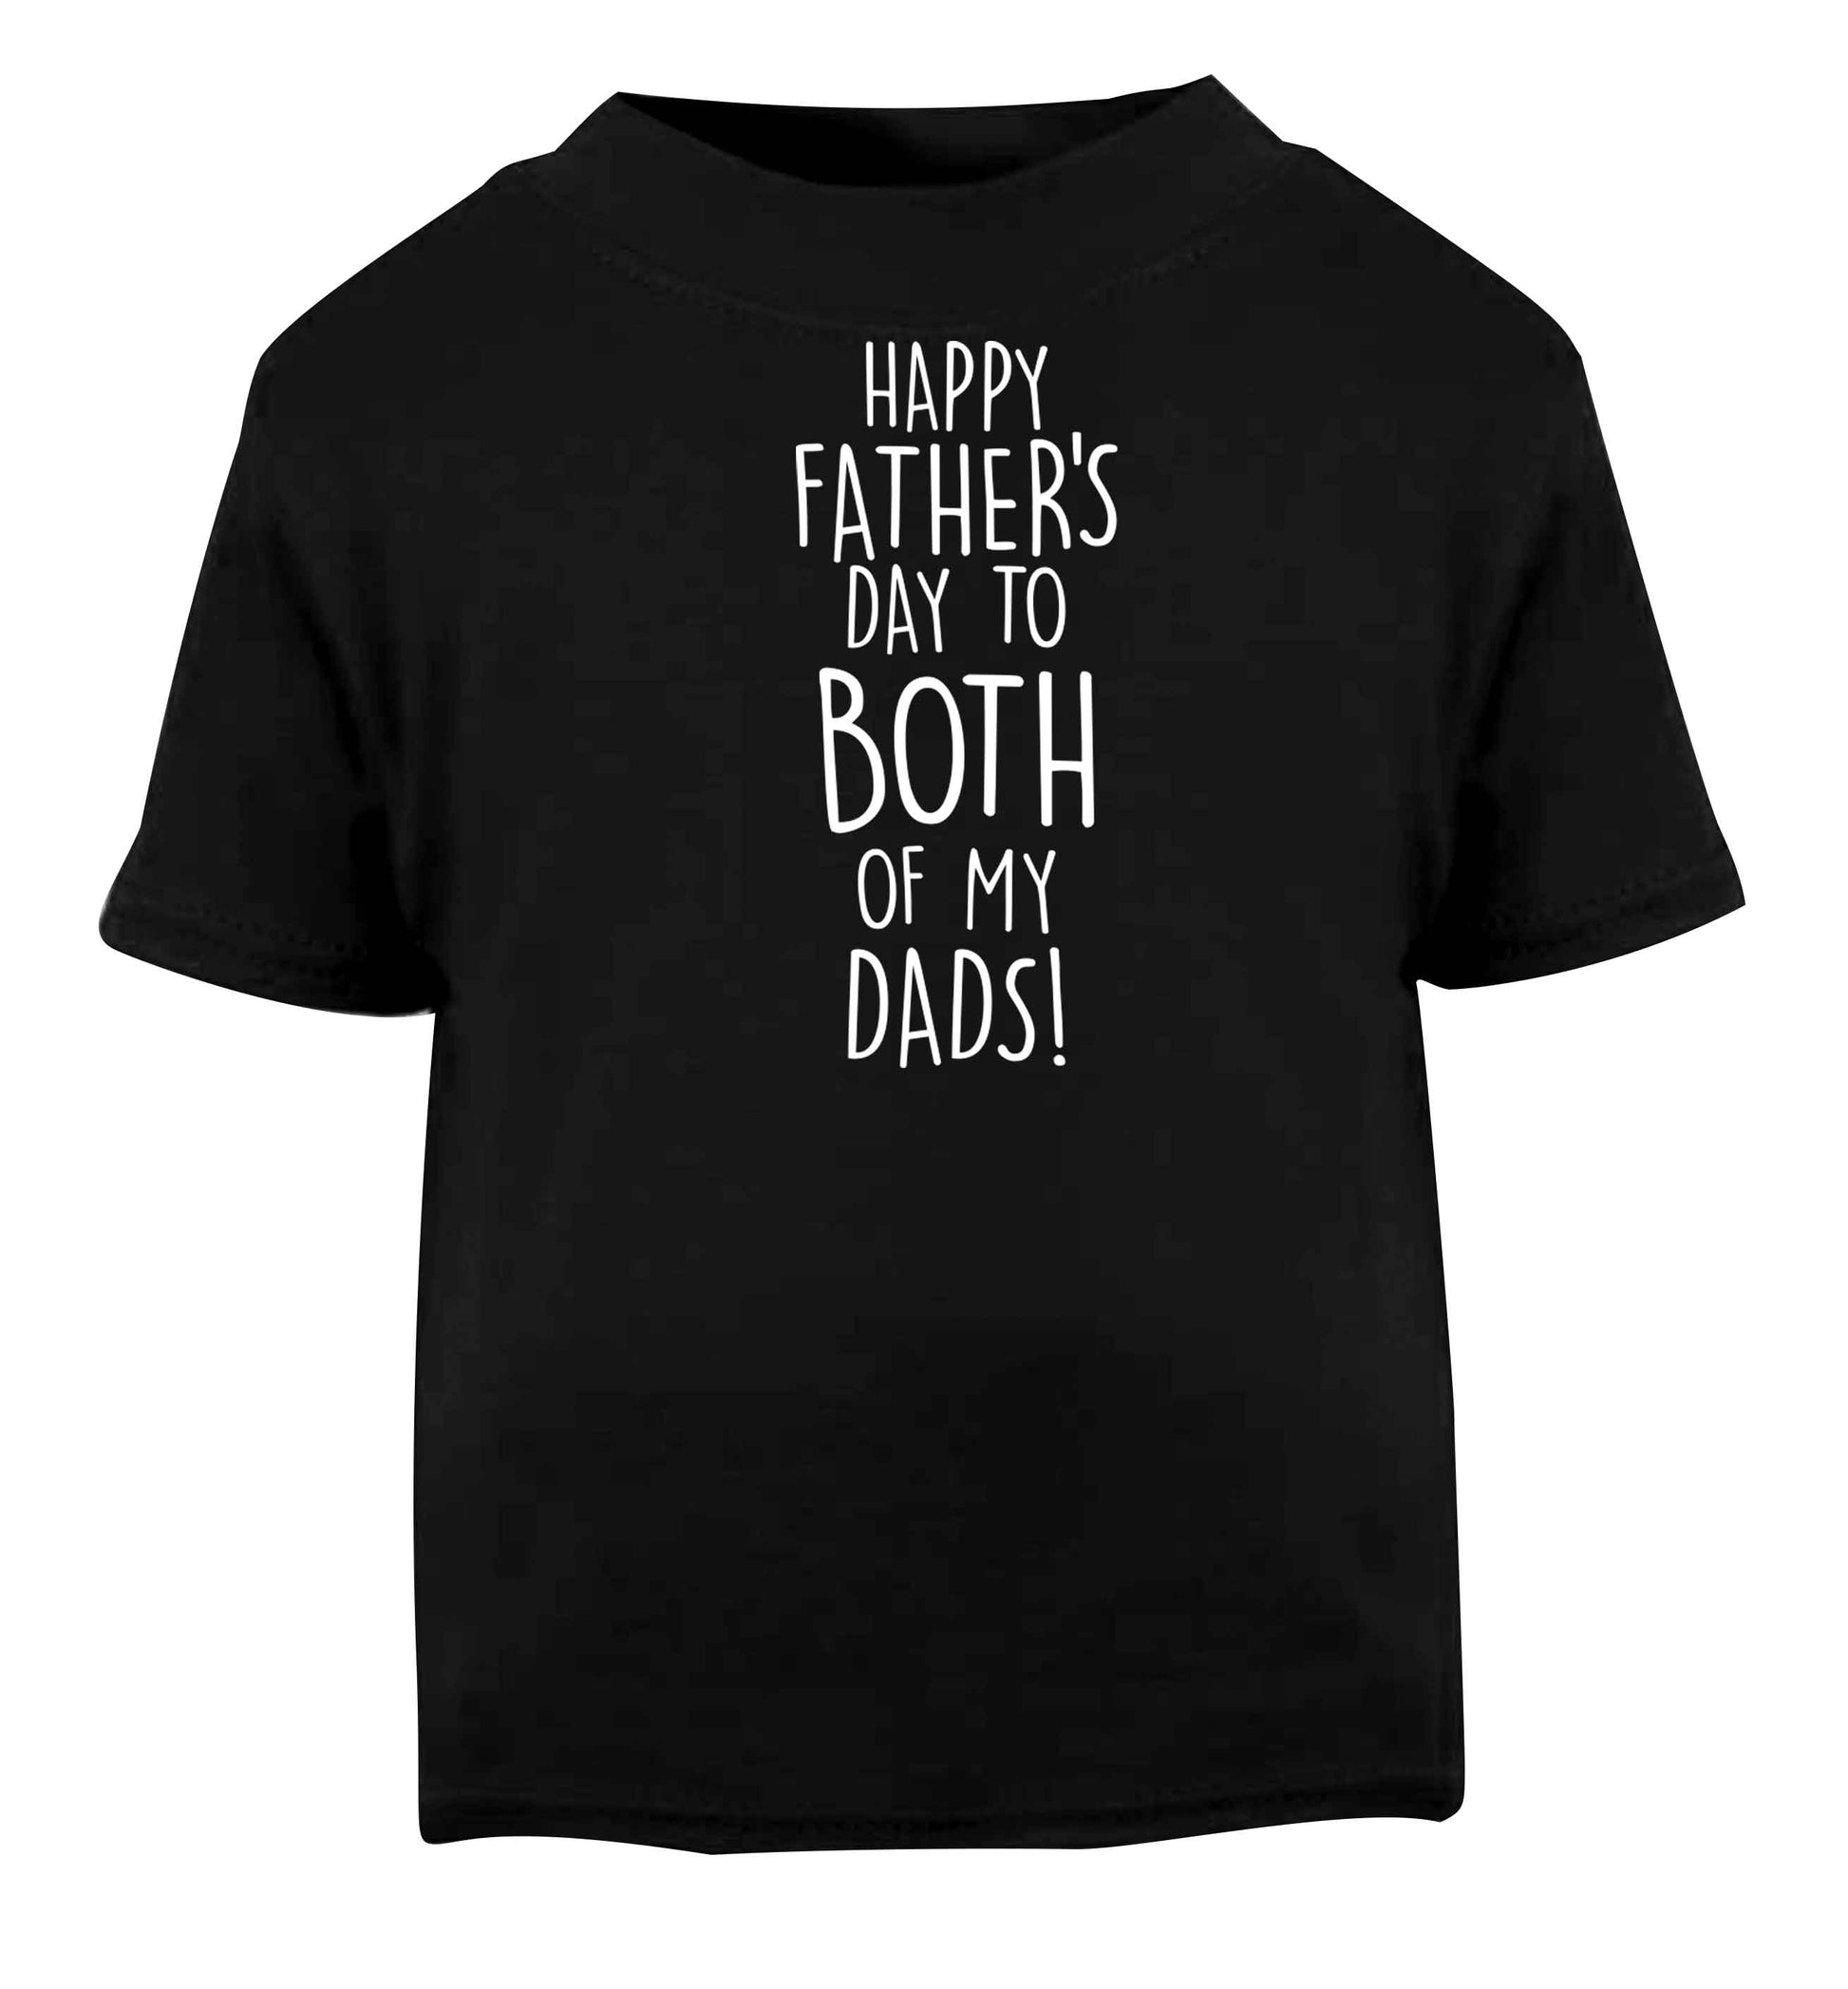 Happy Father's day to both of my dads Black baby toddler Tshirt 2 years